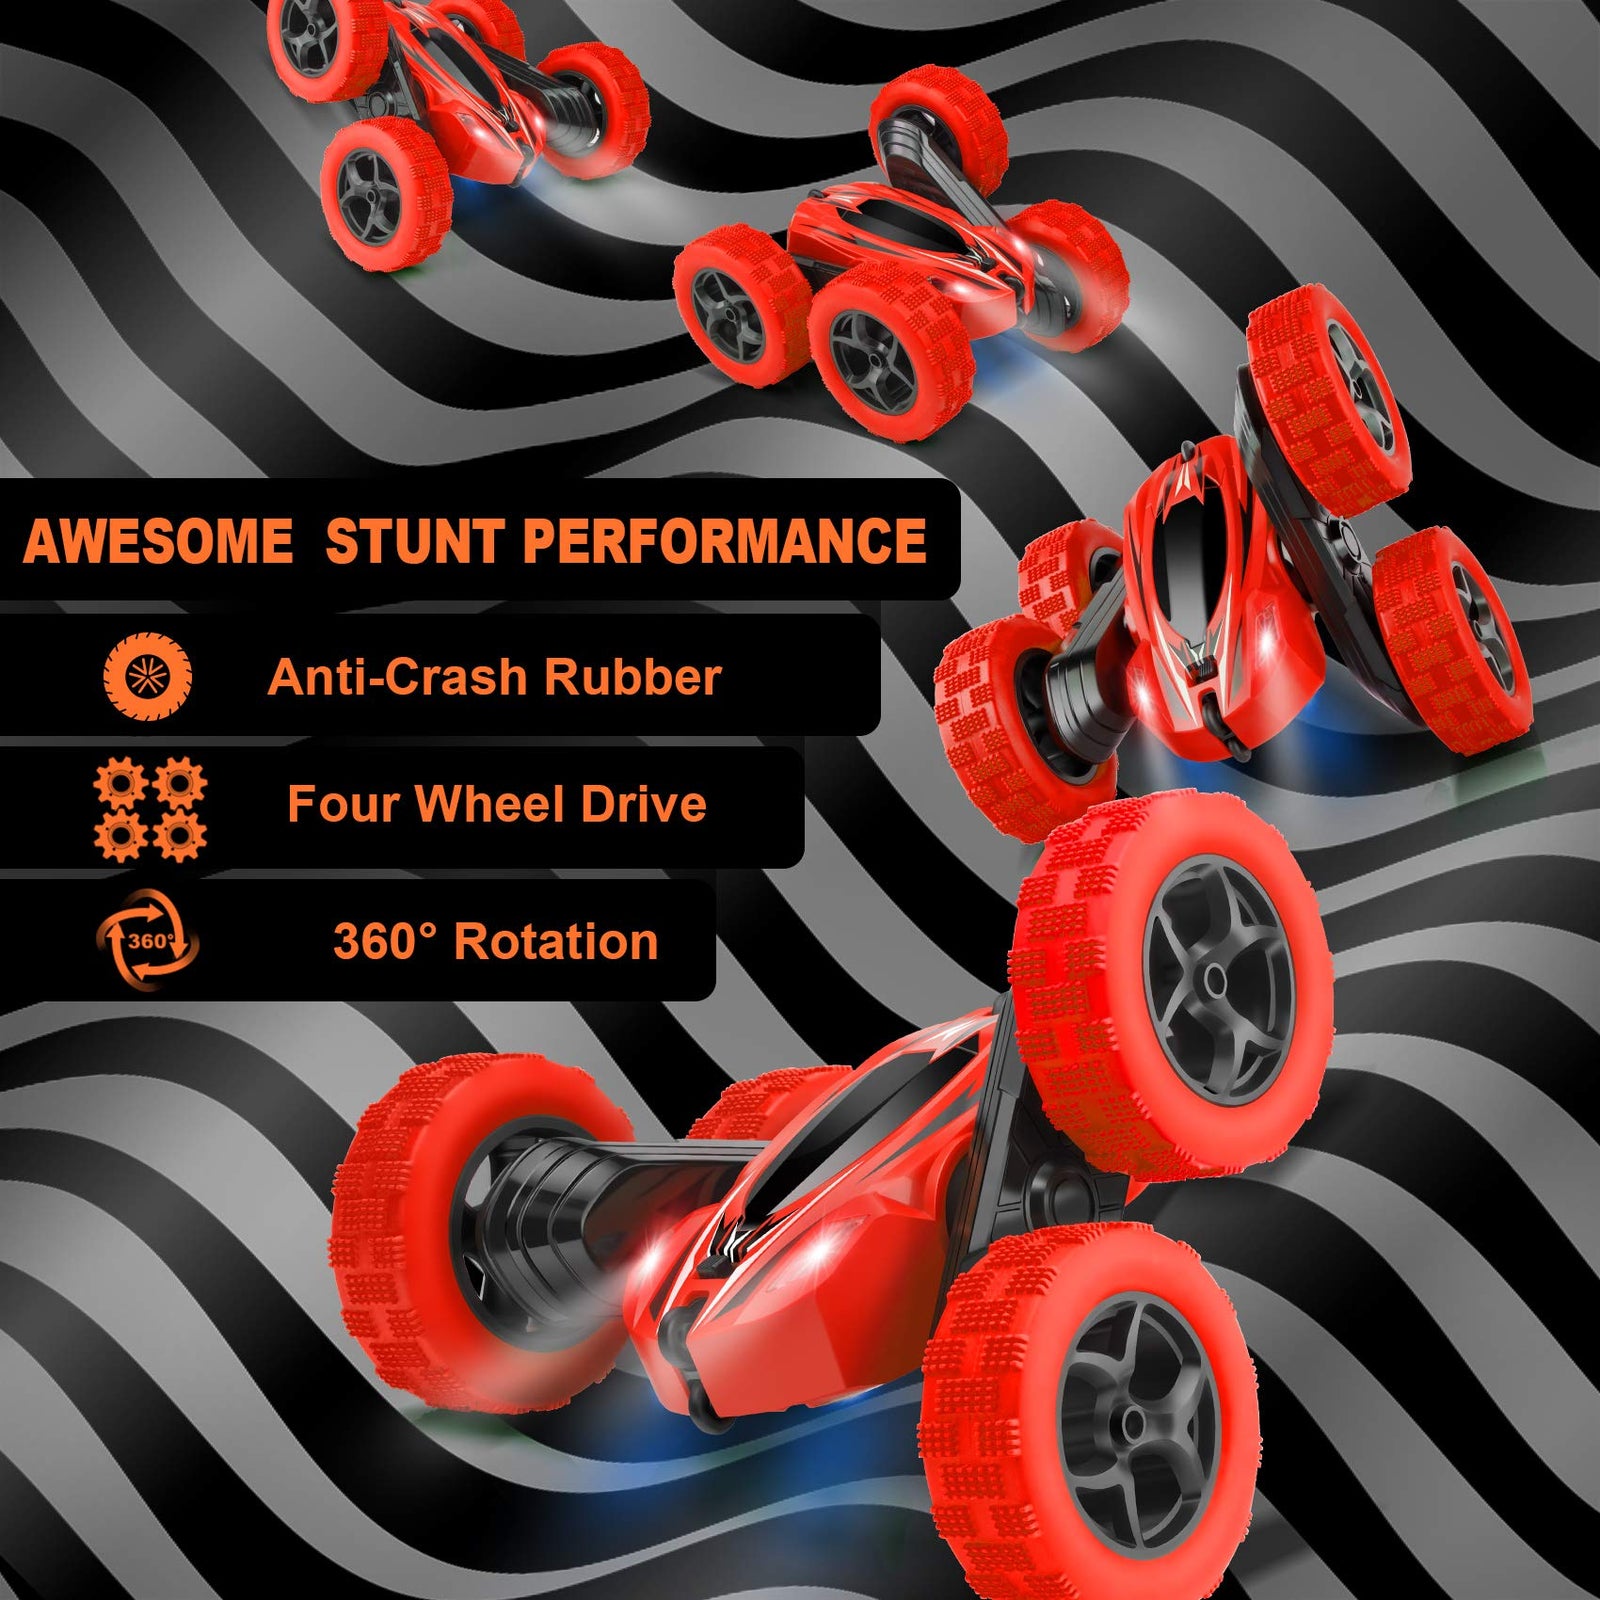 Remote Control Car, ORRENTE RC Cars Stunt Car Toy, 4WD 2.4Ghz Double Sided 360° Rotating RC Car with Headlights, Kids Xmas Toy Cars for Boys/Girls (Green)